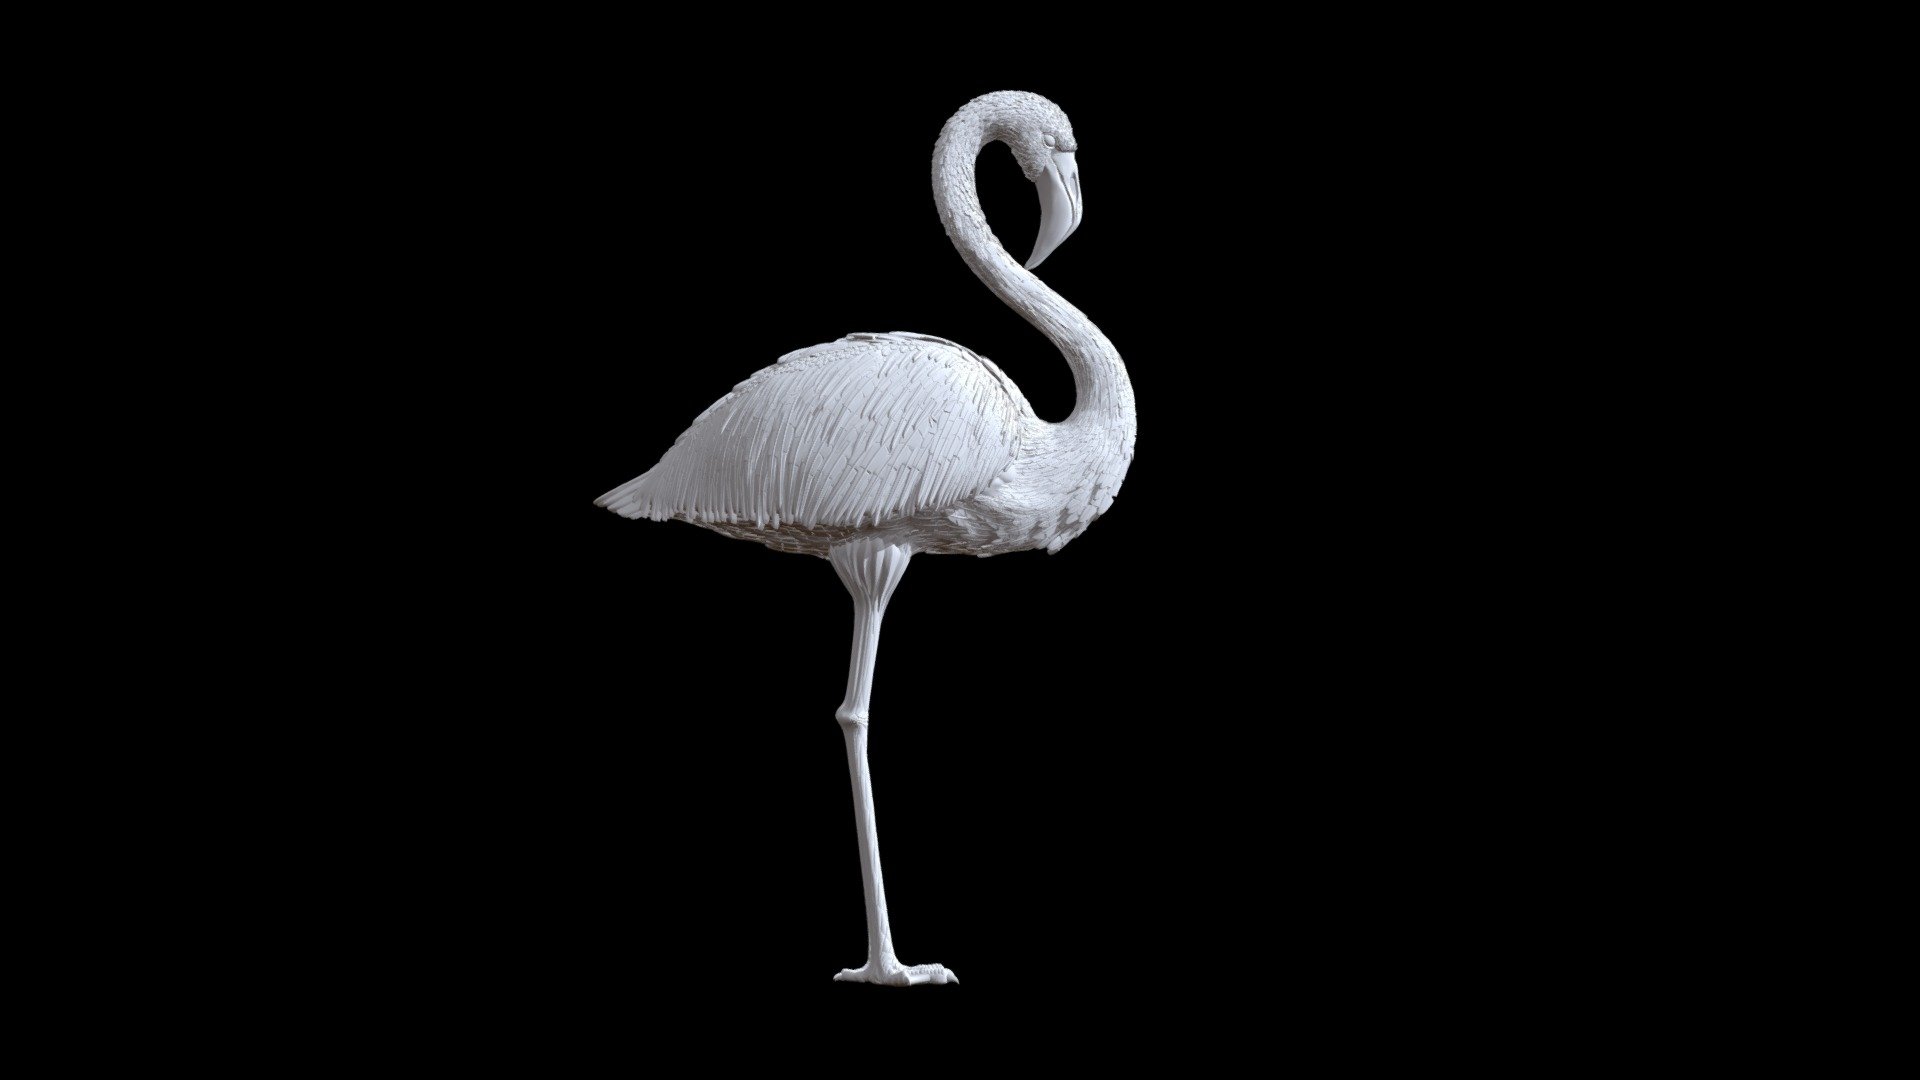 The format is OBJ, STL, Zbrush.

model for printing on a 3d printer - flamingo - Buy Royalty Free 3D model by explorertit36@gmail.com (@paydi) 3d model